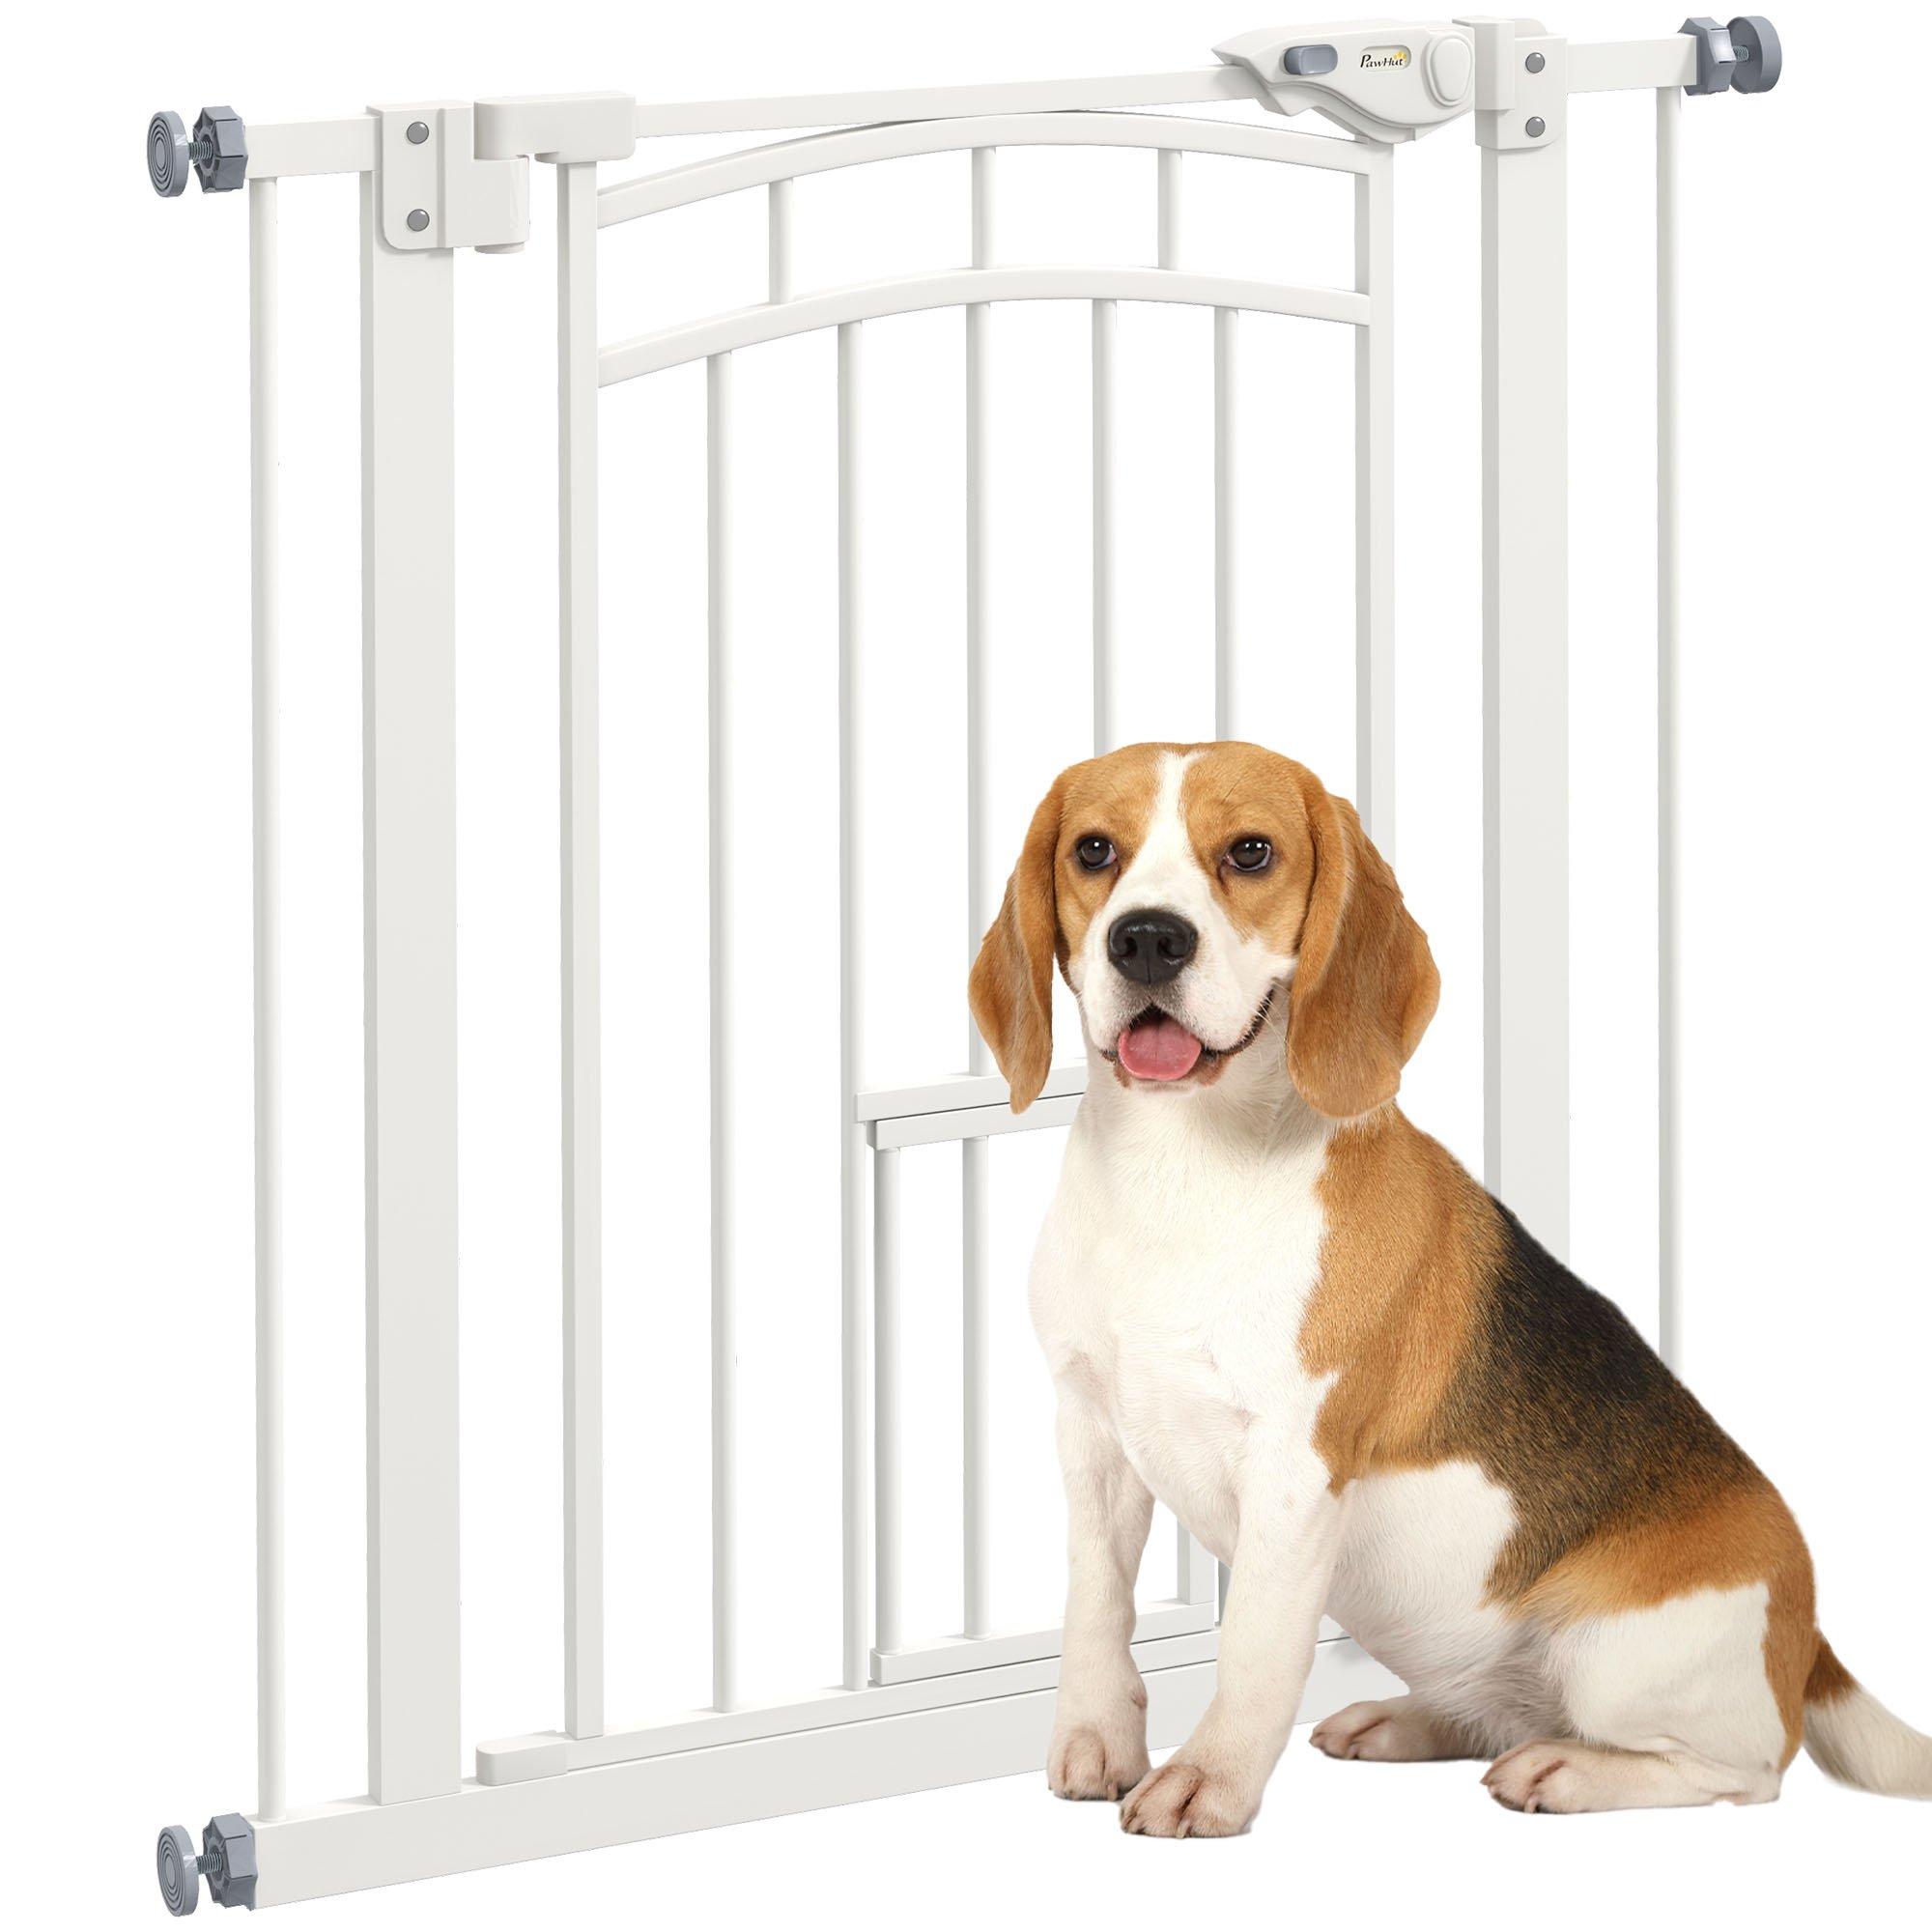 Pressure Fit Safety Gate w/ Small Cat Door, Double Locking, Openings 74-80cm